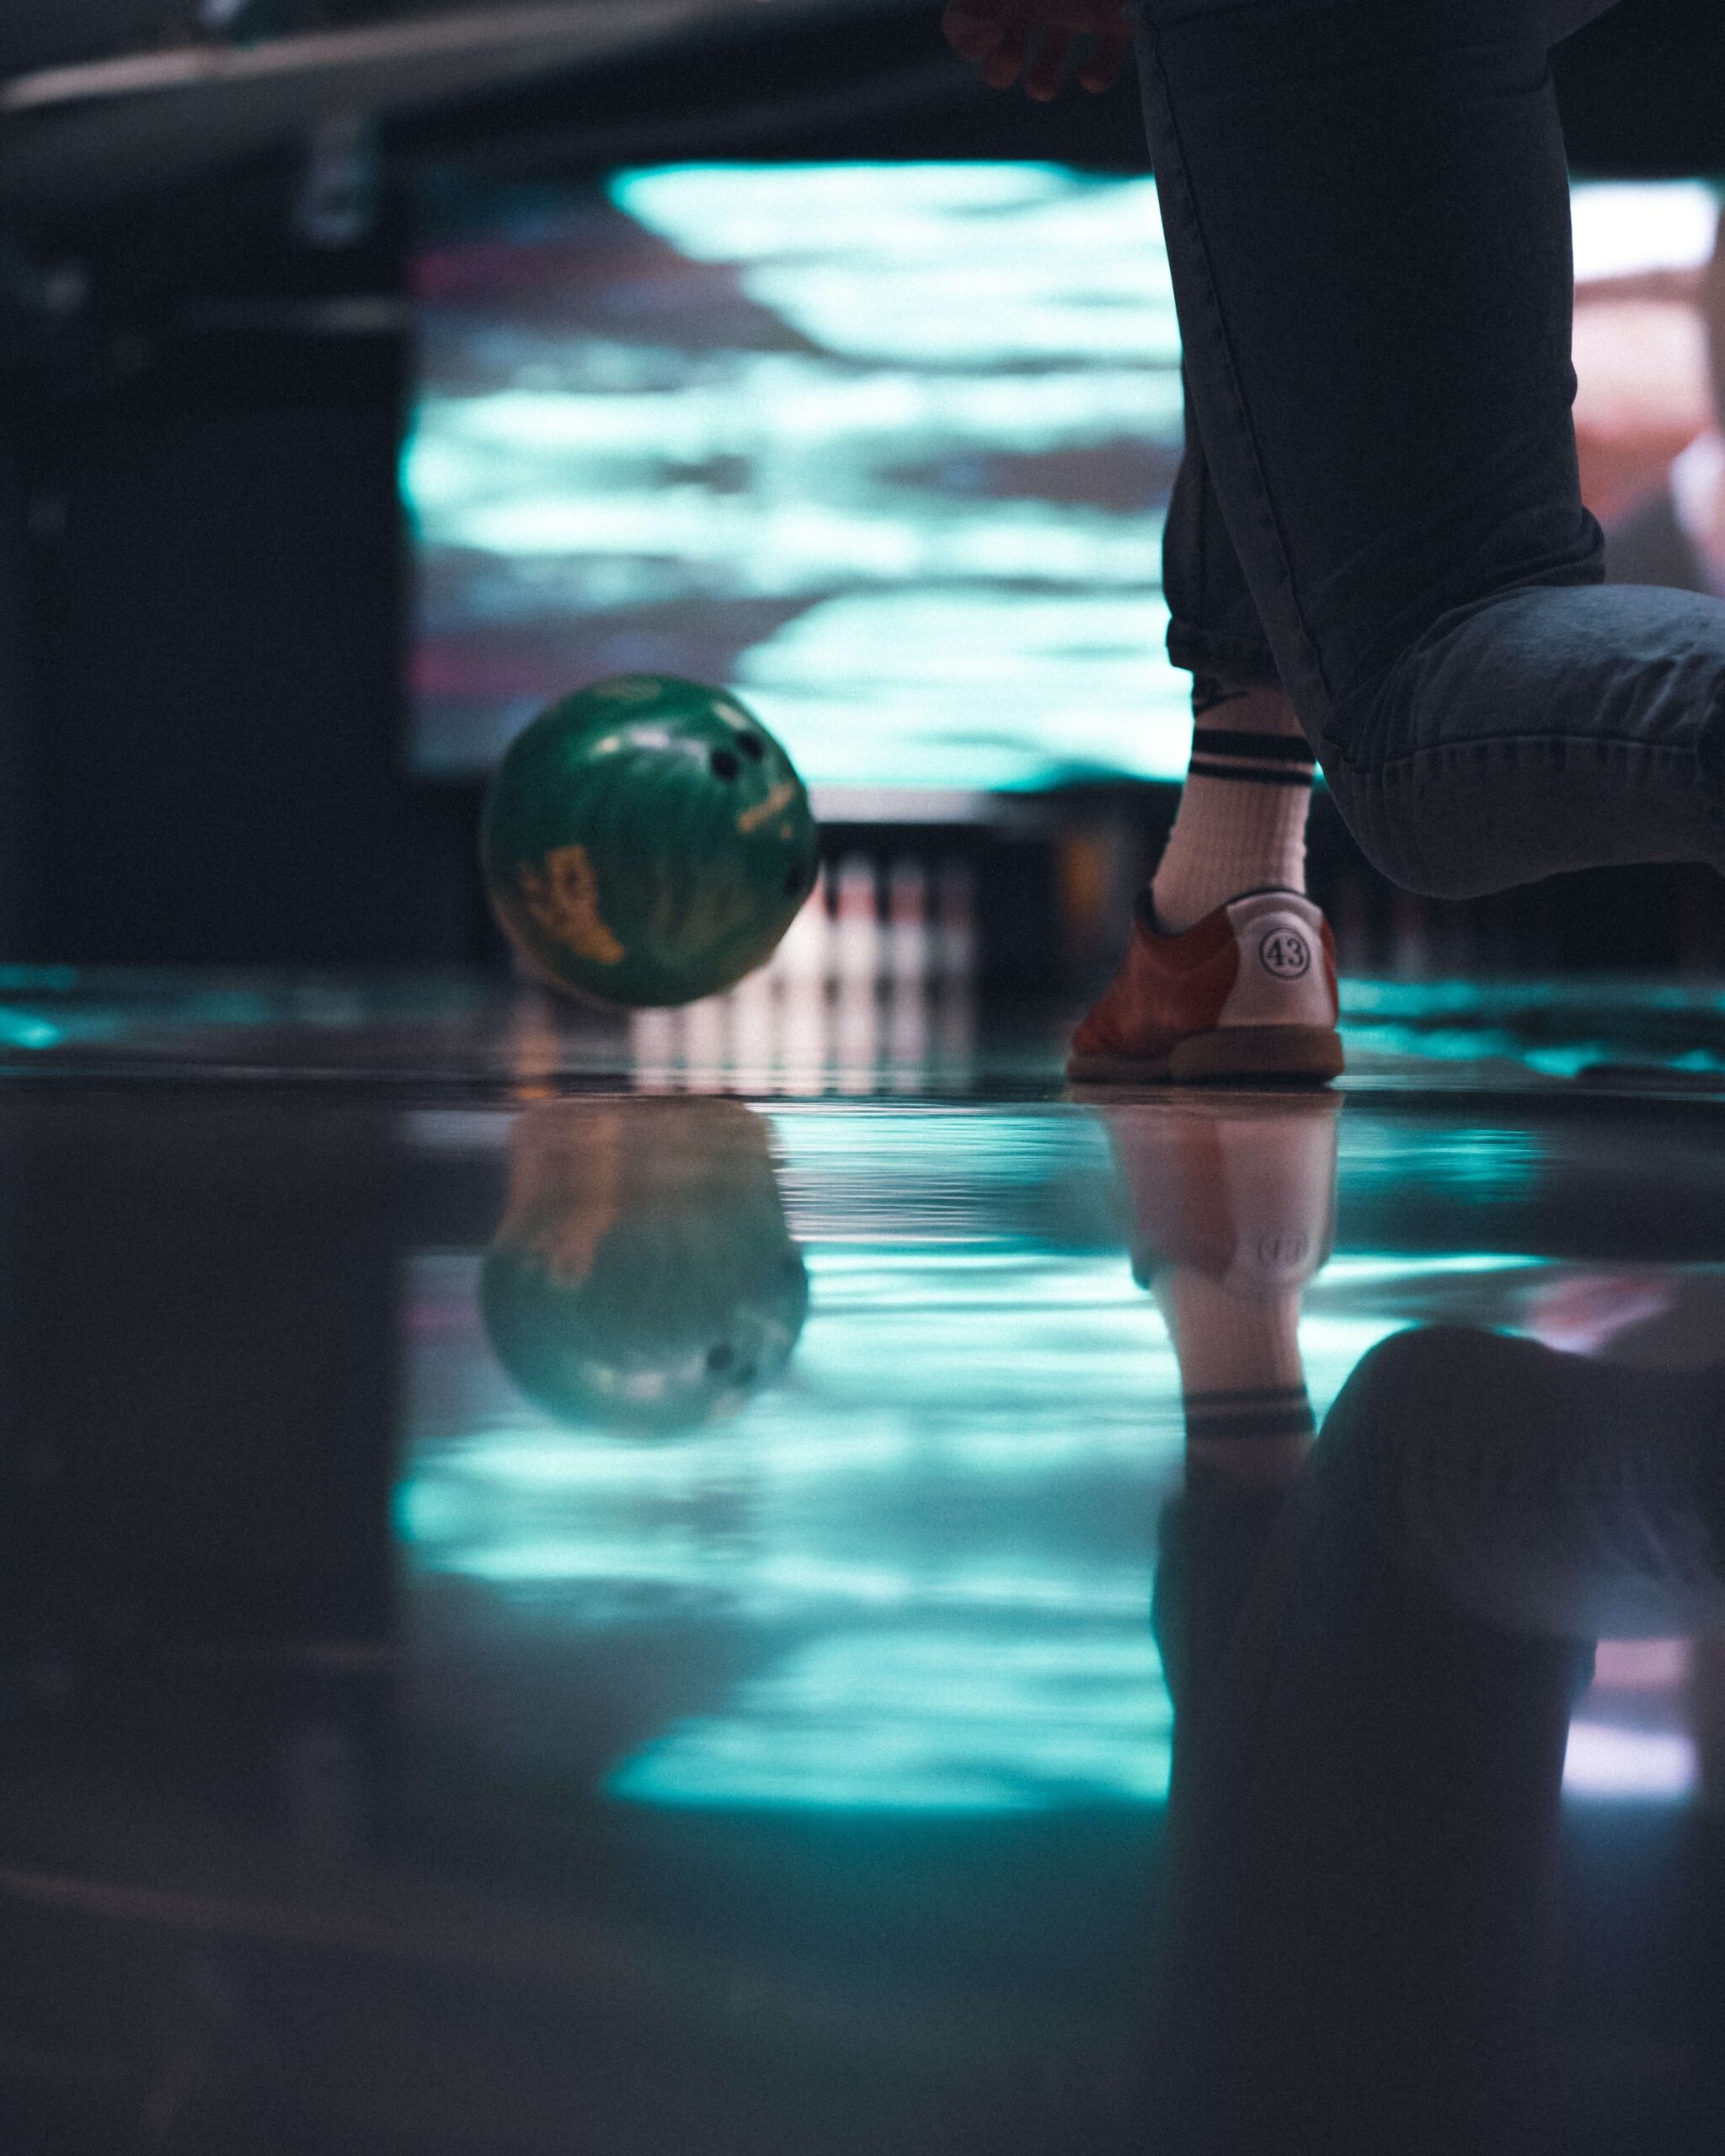 Strike Up the Fun at Shamrock Lanes Bowling for a Perfect Blend of Team Building and Entertainment at the Grizzly Classic Men's Artistic Gymnastics Competition.